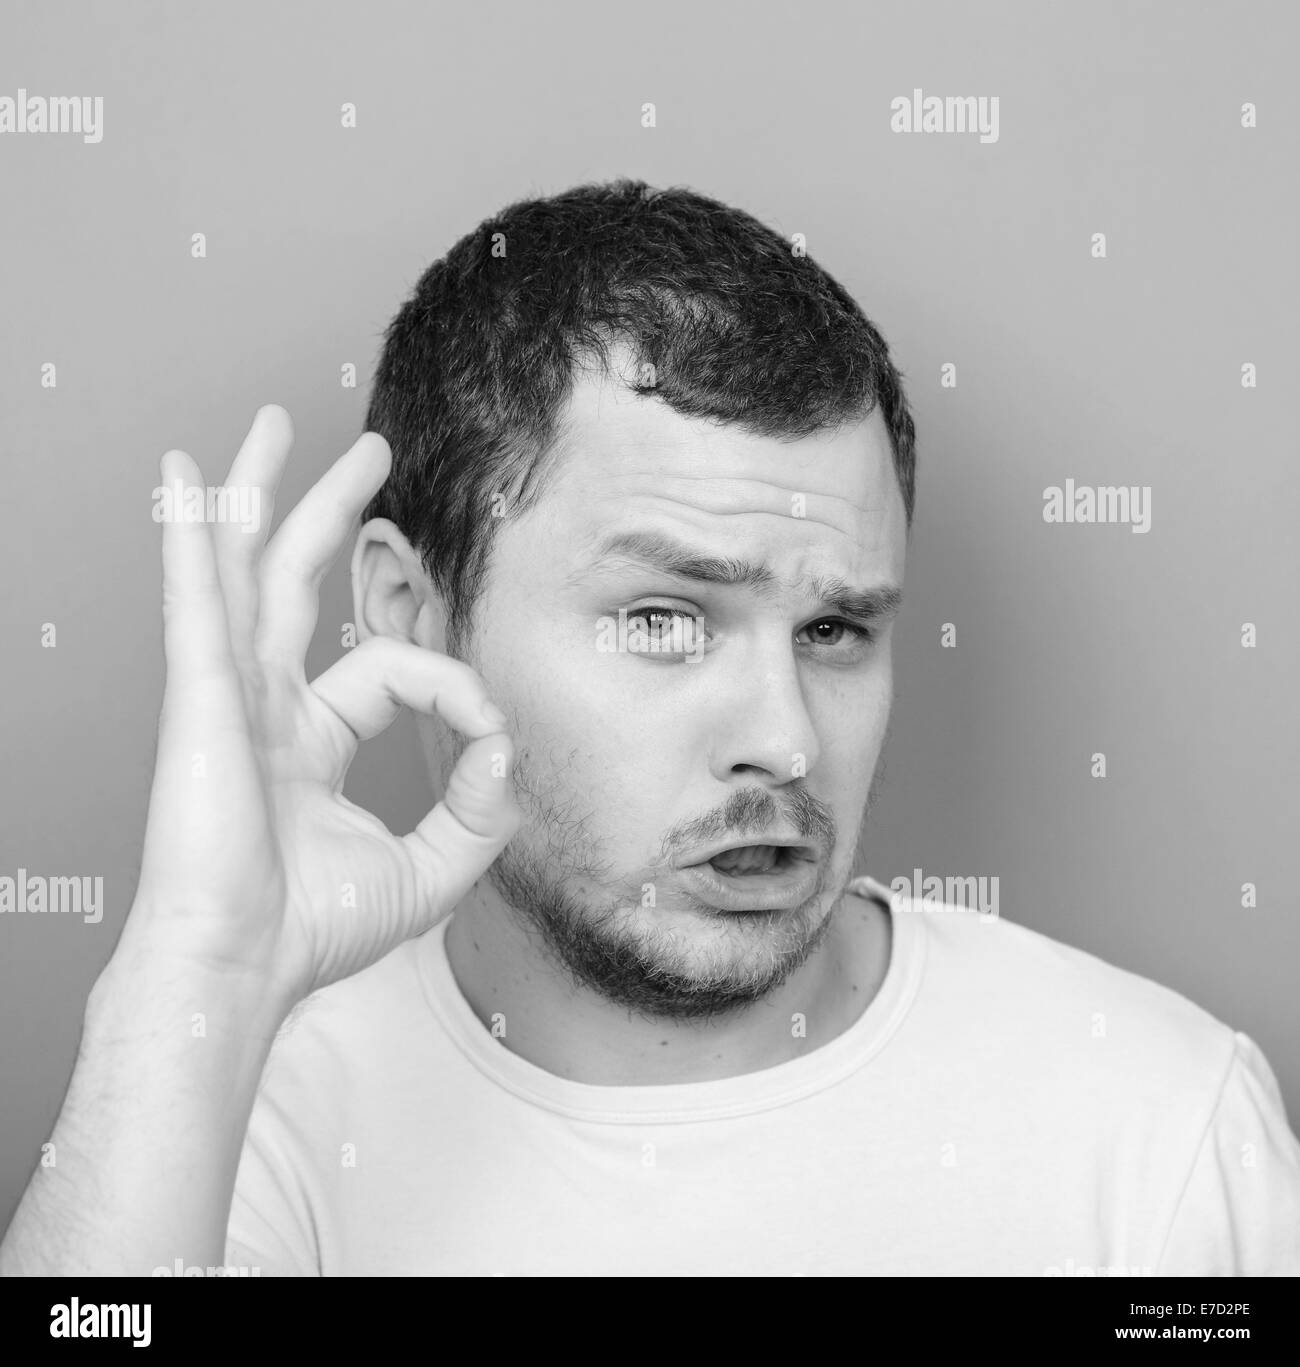 Portrait of funny man showing OK gesture - Monocrome or black and white portrait Stock Photo